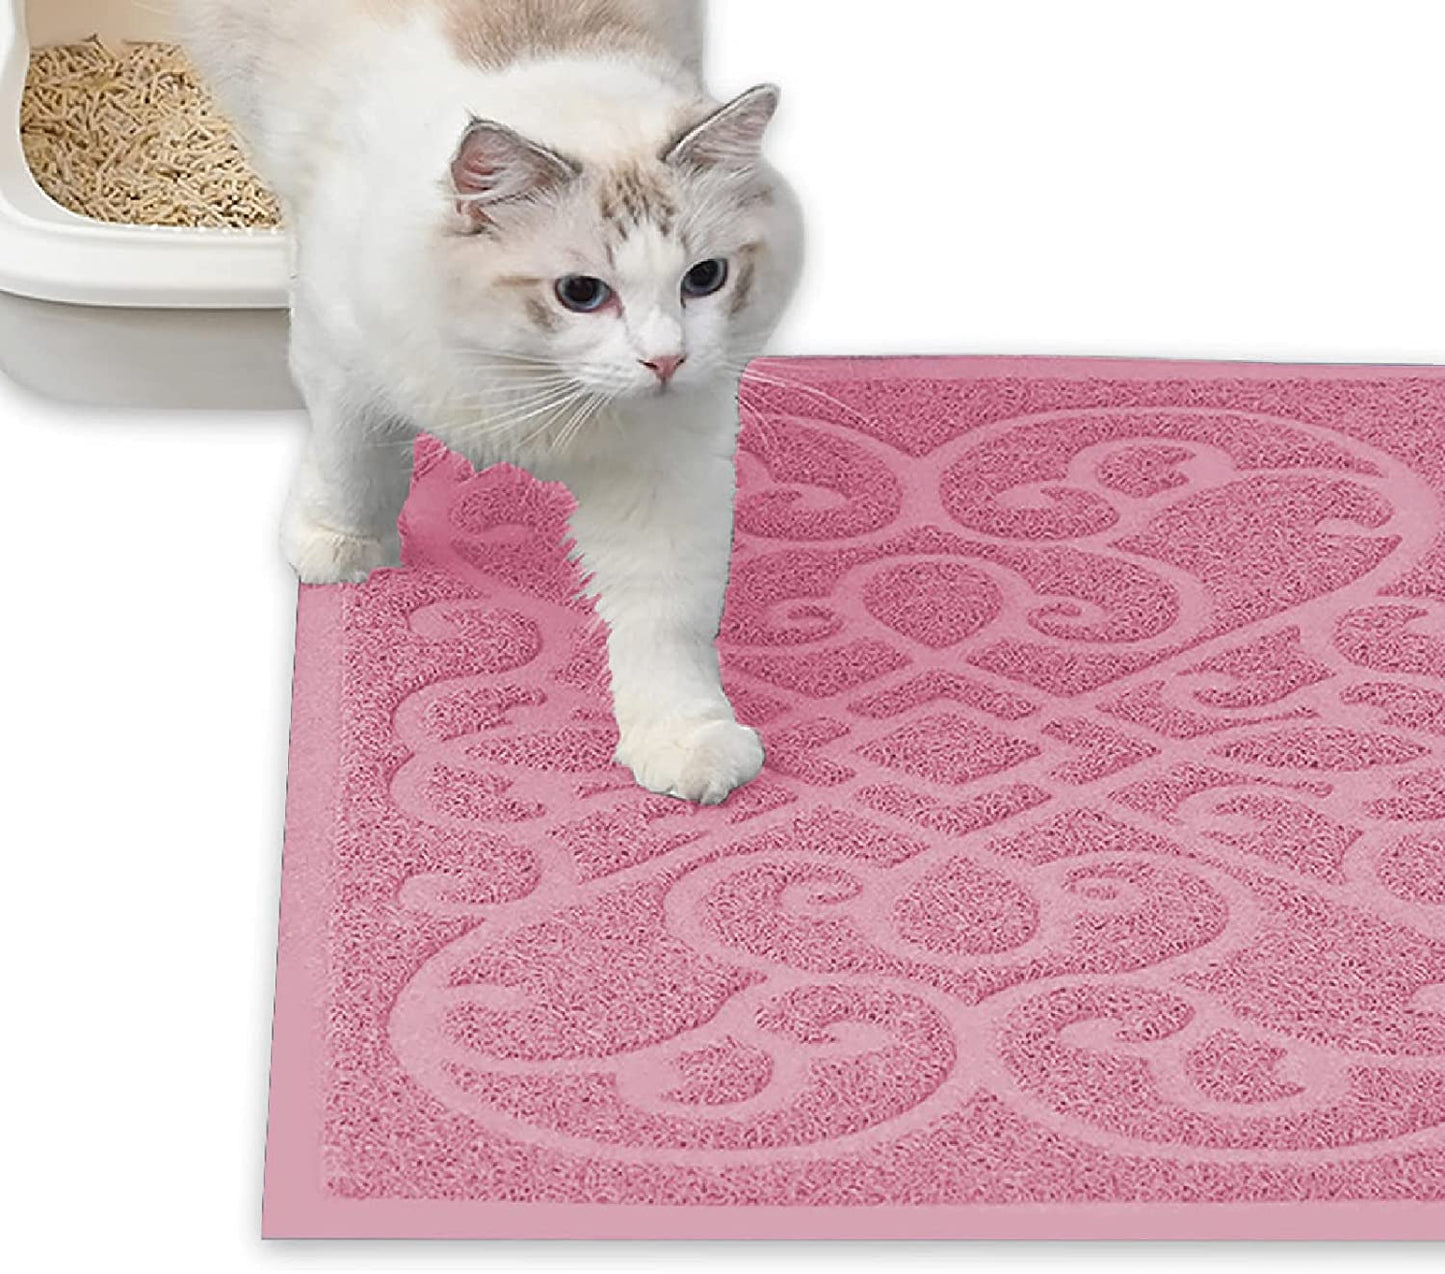 Stylish Cat Litter Mat: Thick and Durable with Litter Trapping Design, Waterproof and Washable, Non-Slip Backing, Soft on Kitty Paws, Easy to Clean, Phthalate-Free